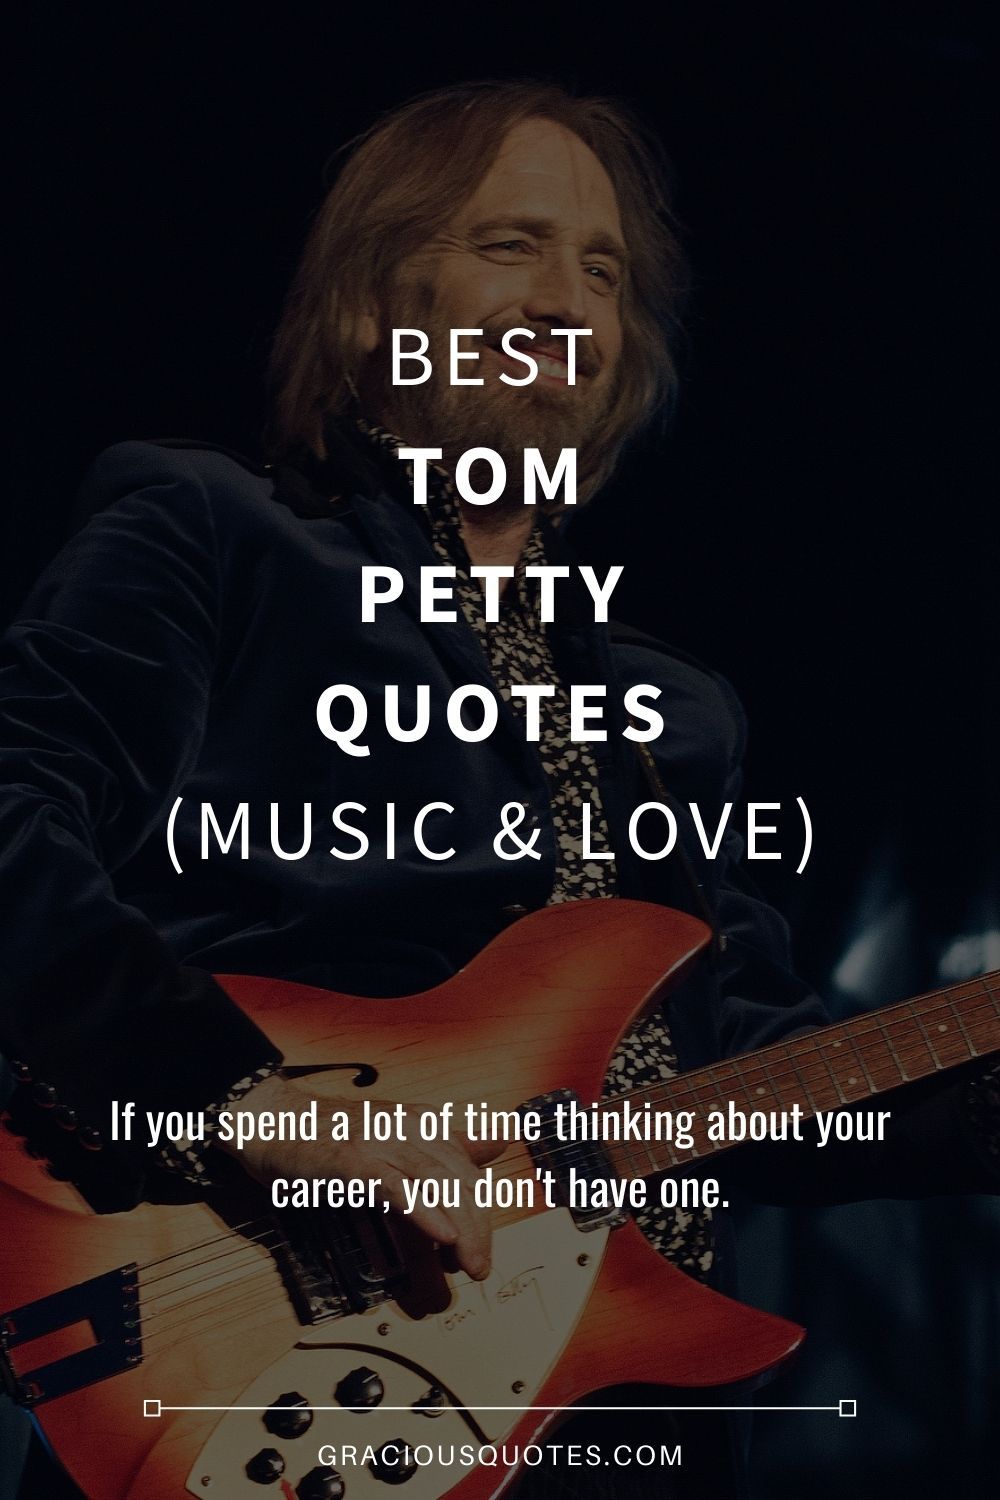 10 Best Tom Petty Quotes